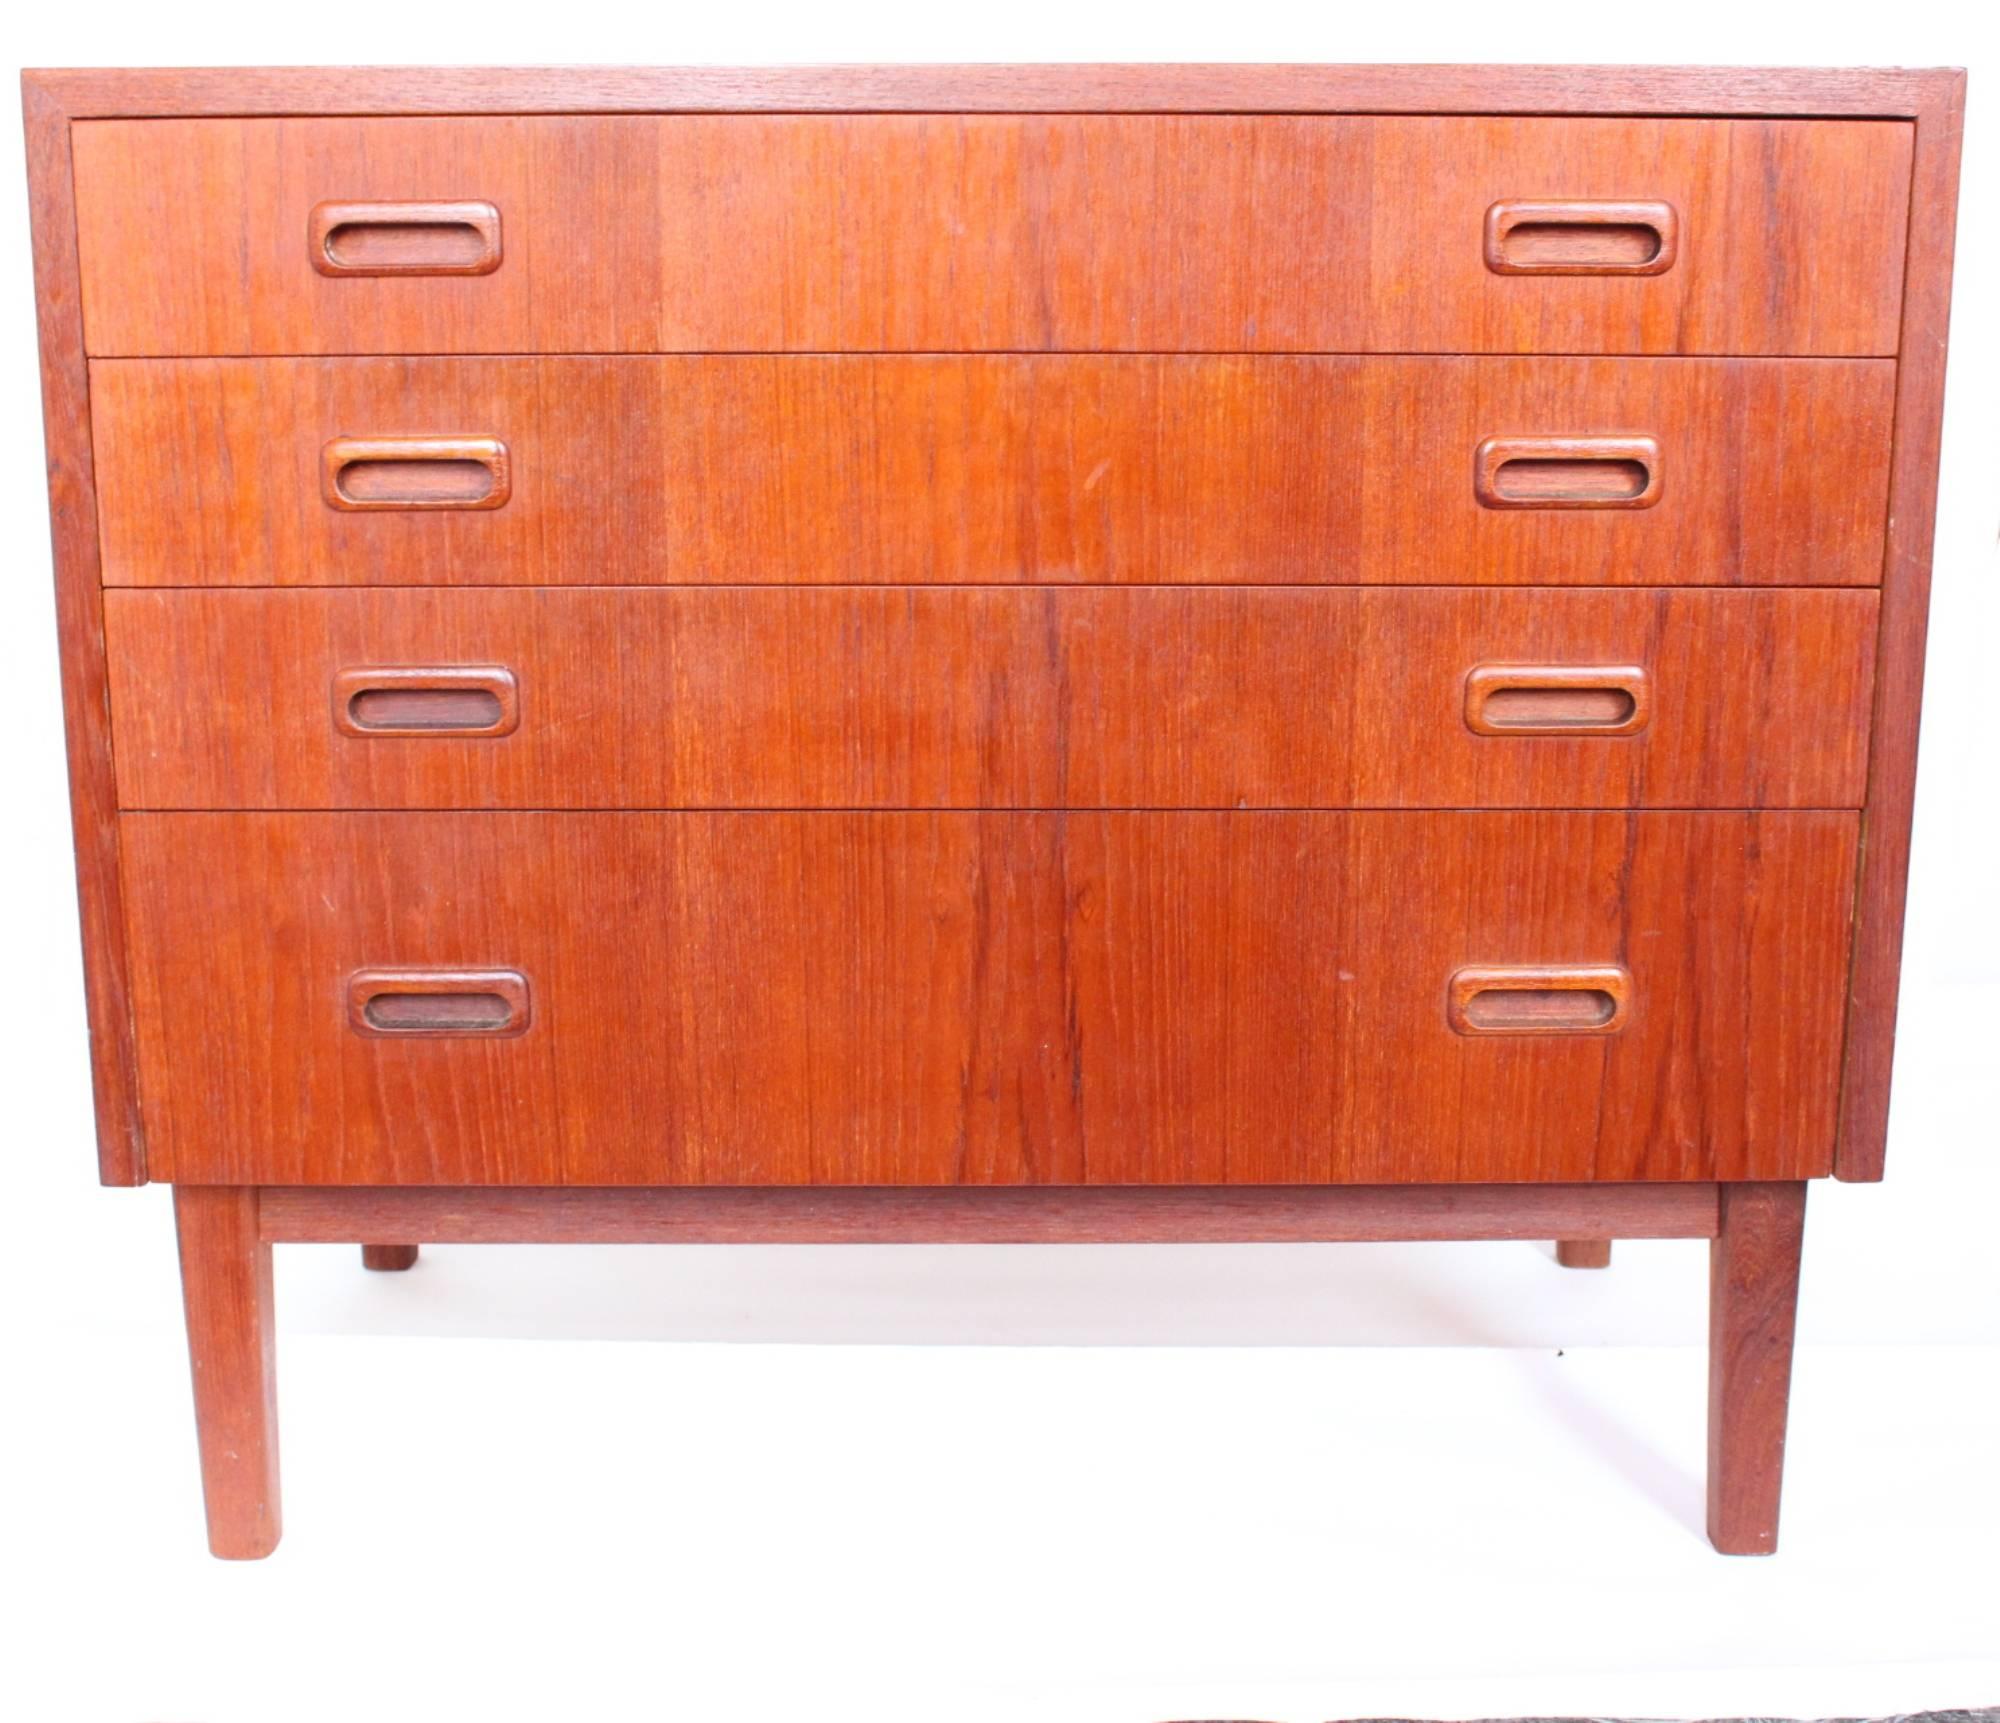 Mid-Century Modern dresser and chest of drawers crafted in teak wood. The dresser features five drawers, all but one with a depth up to 6